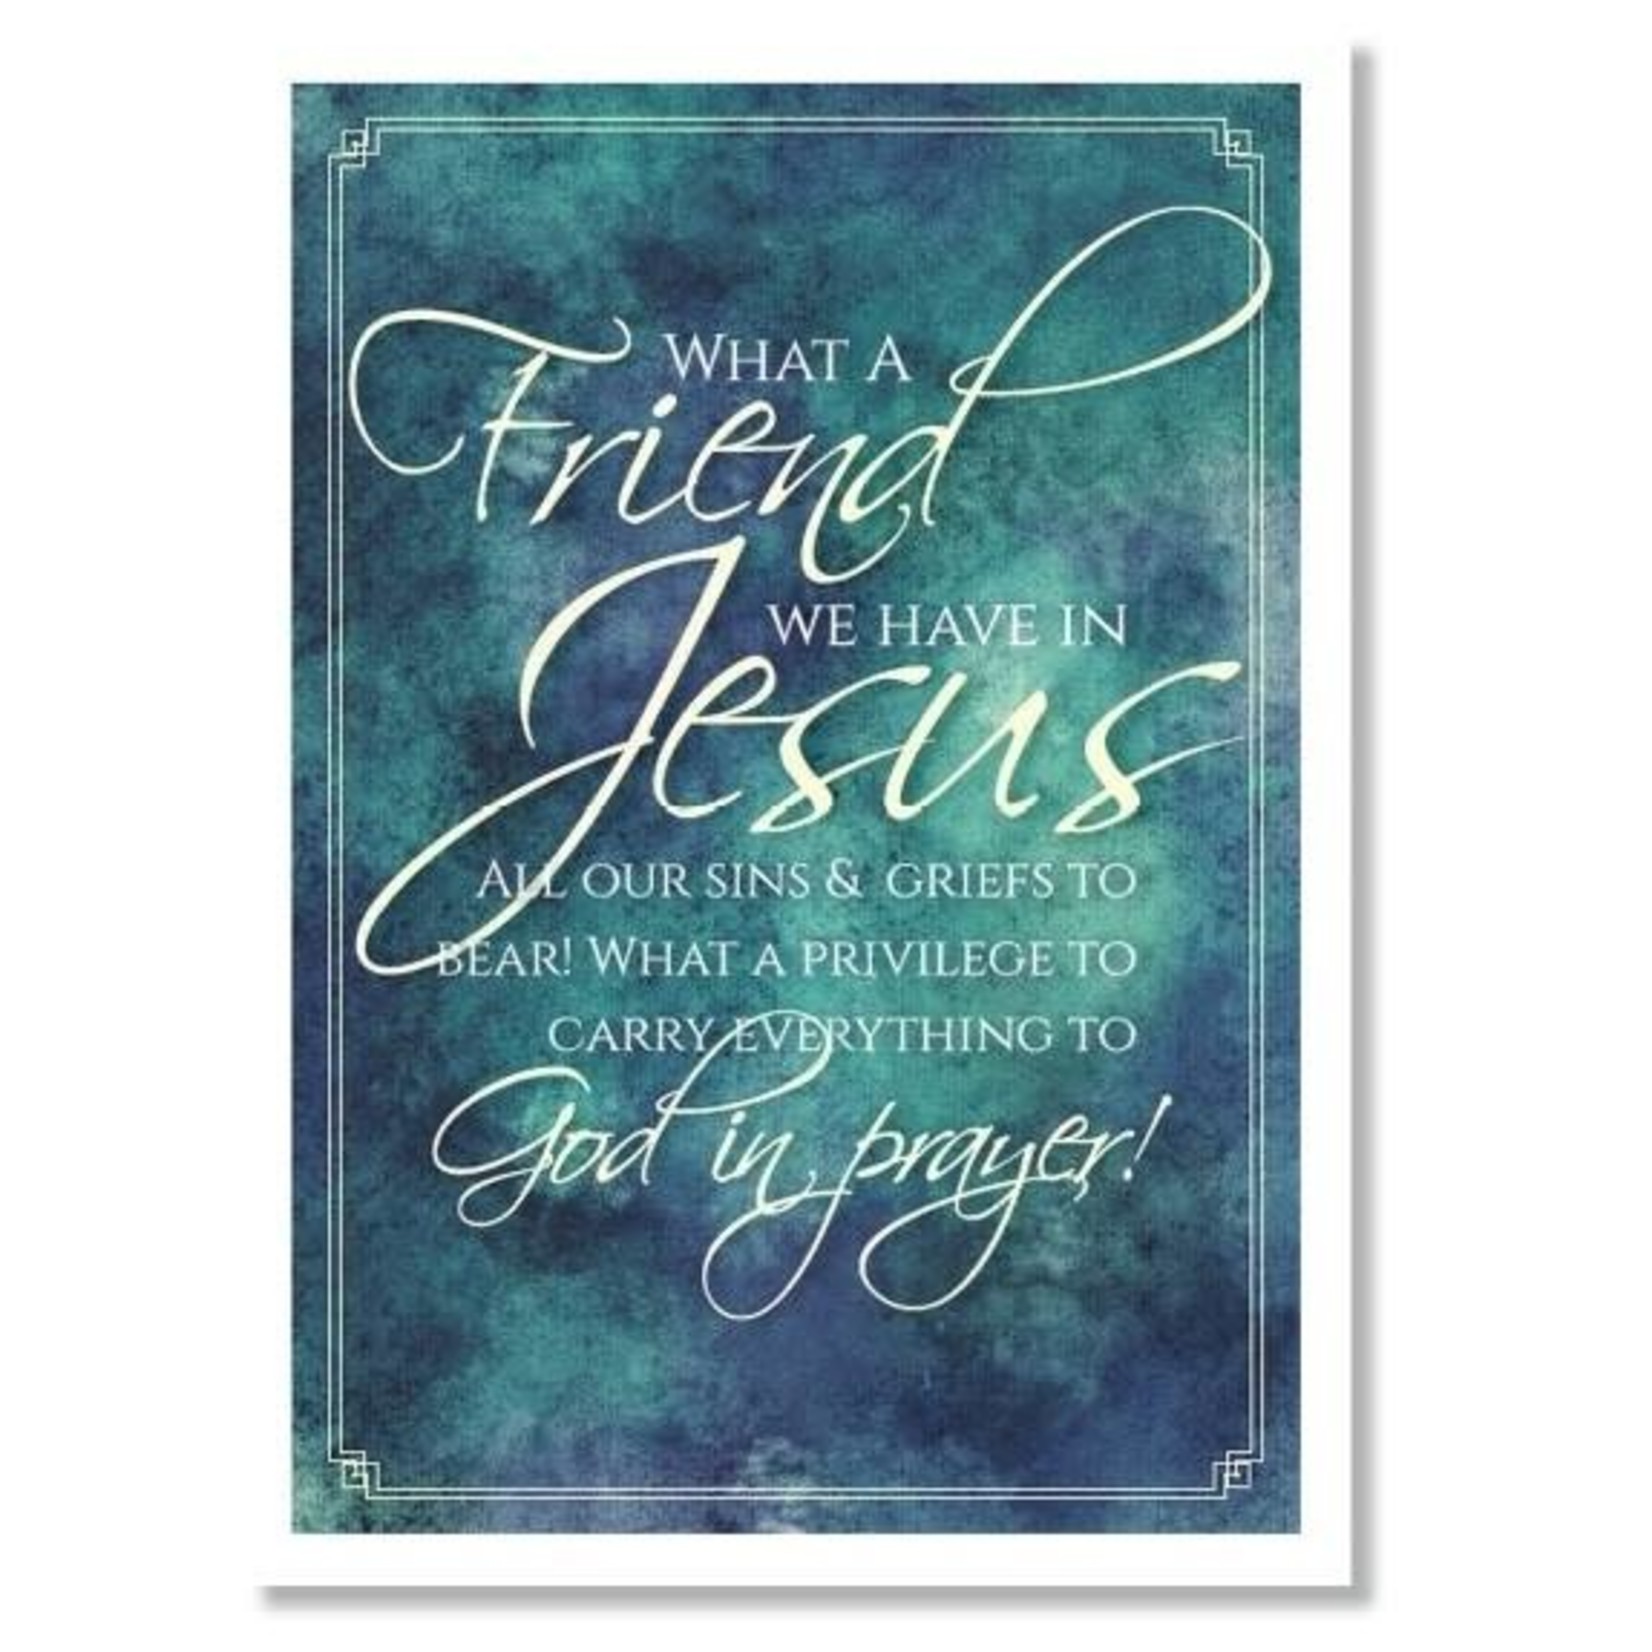 Hymns In My Heart - 5x7" Greeting Card - Friendship - What a Friend We Have In Jesus